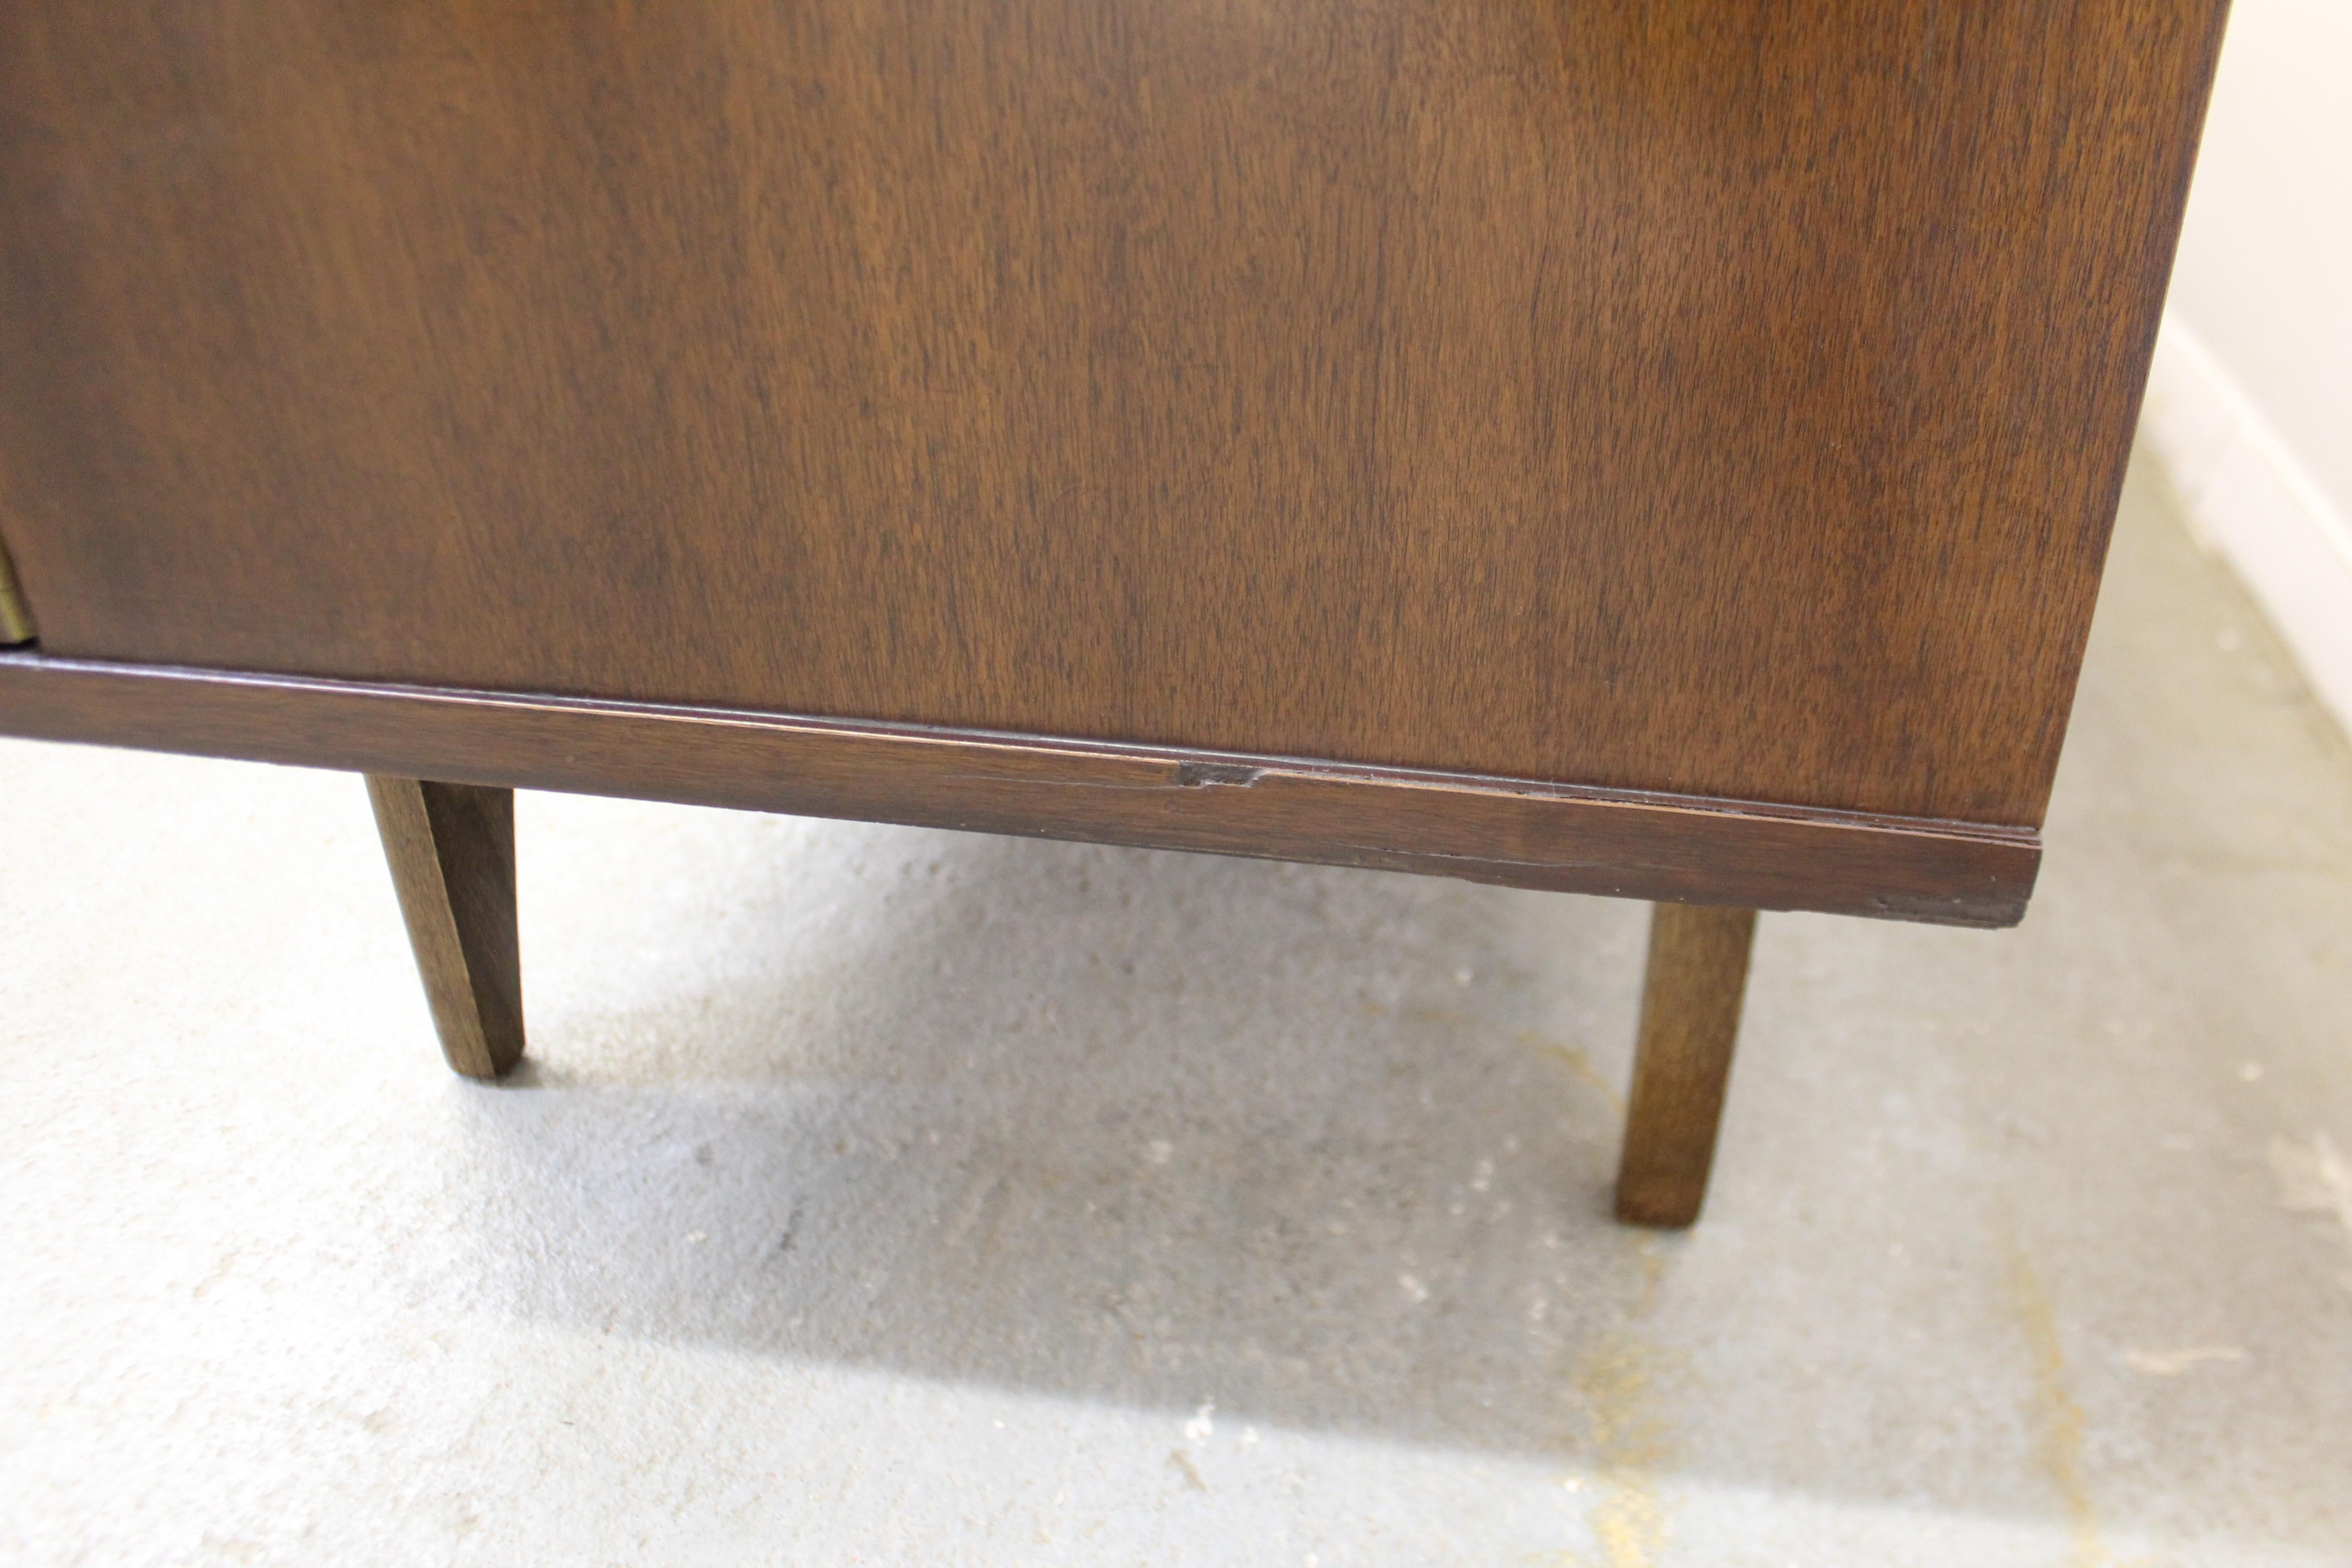  Mid-Century Modern Concave Front Walnut Credenza by Young Mfg. Co. 3